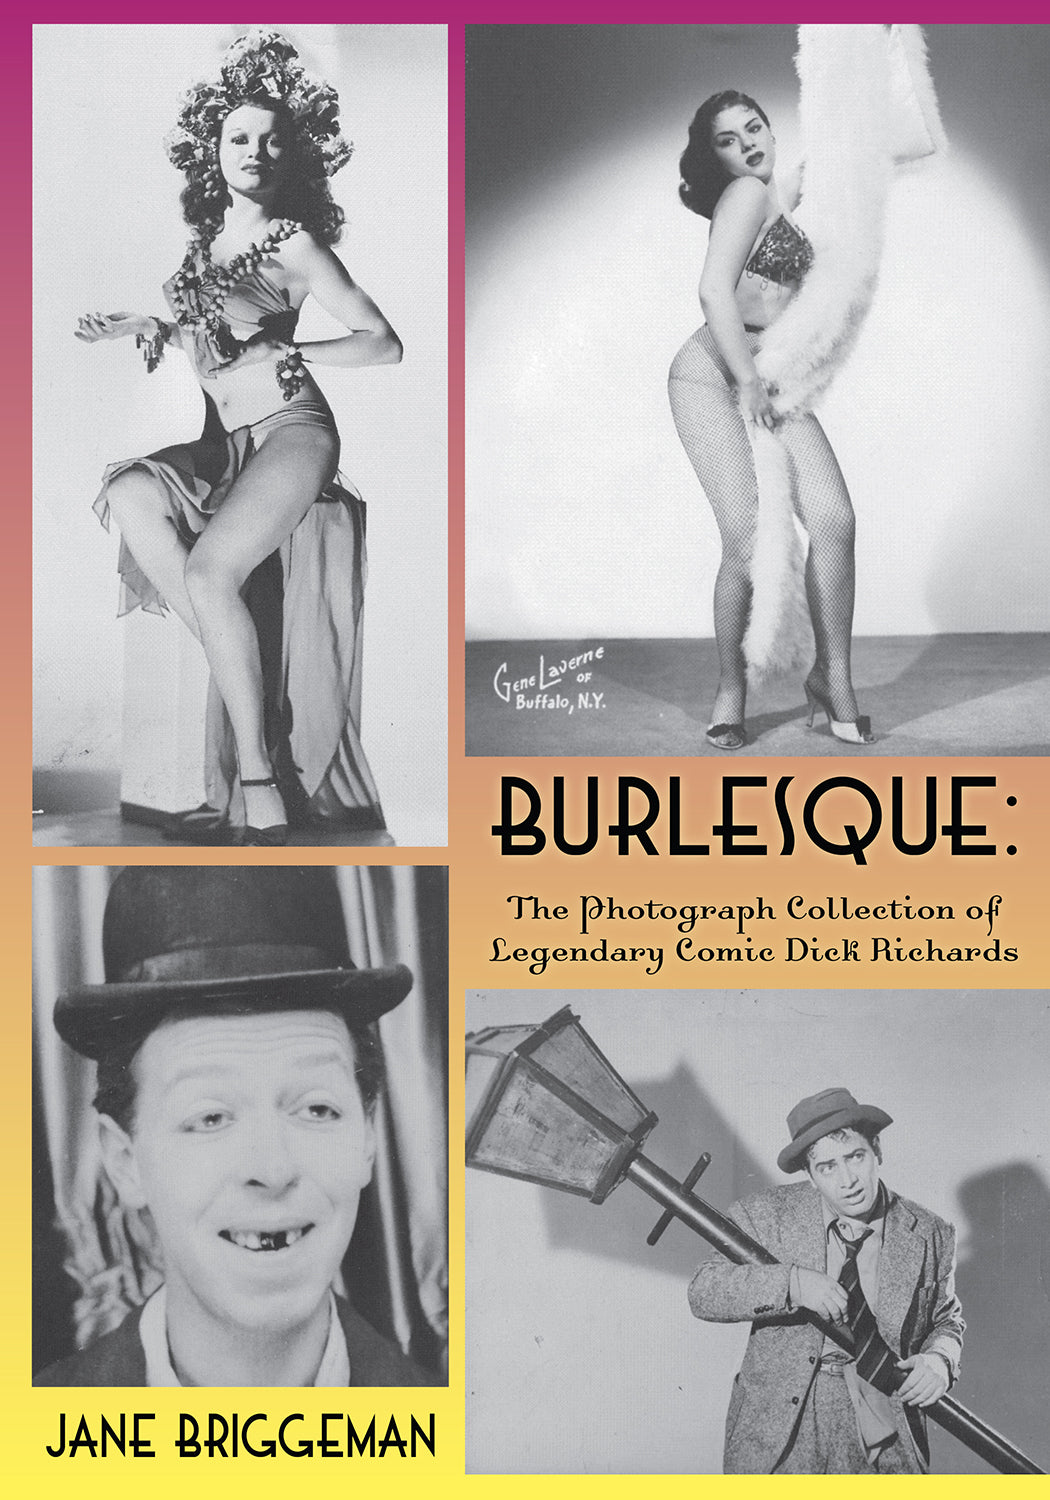 Burlesque: The Photograph Collection of Legendary Comic Dick Richards (paperback)